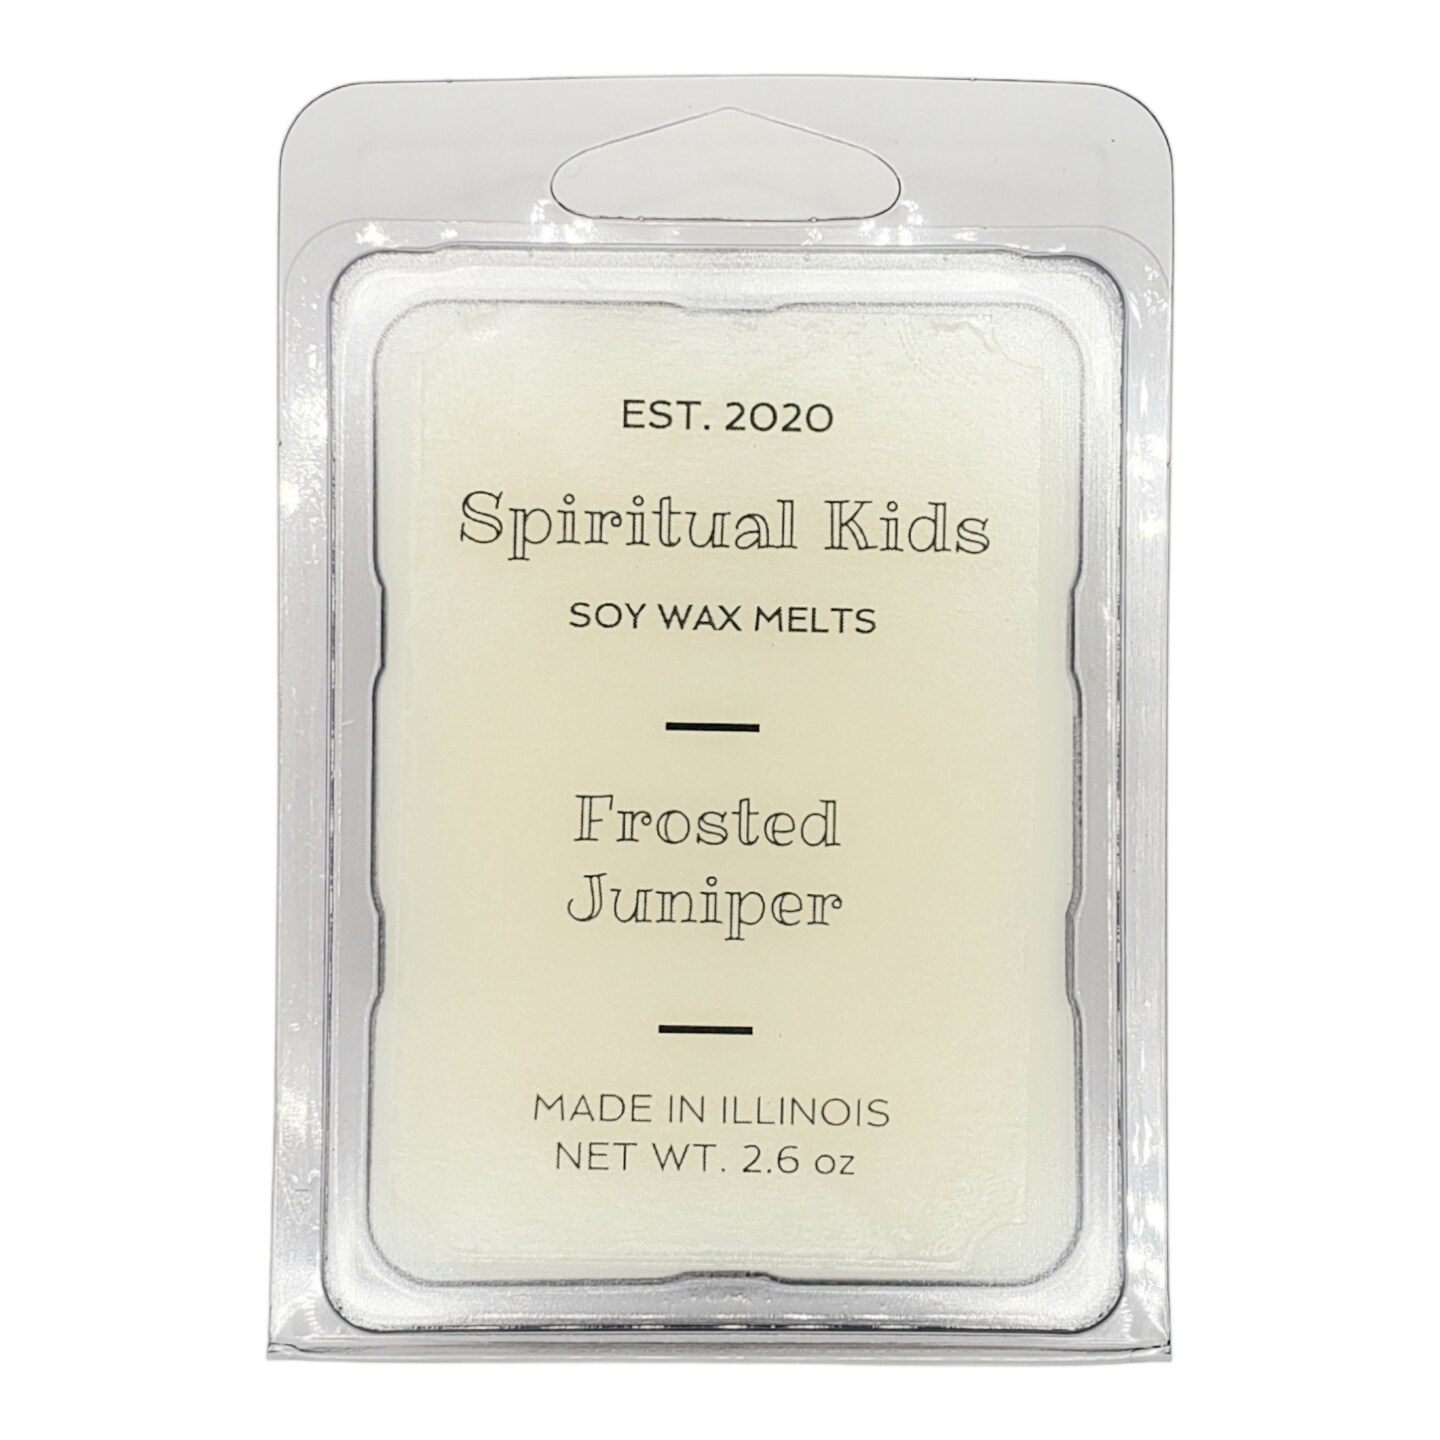 Frosted Juniper 2.6oz All Natural Soy Wax Melts 6ct Hand Poured with Fragrant/Essential Oils!